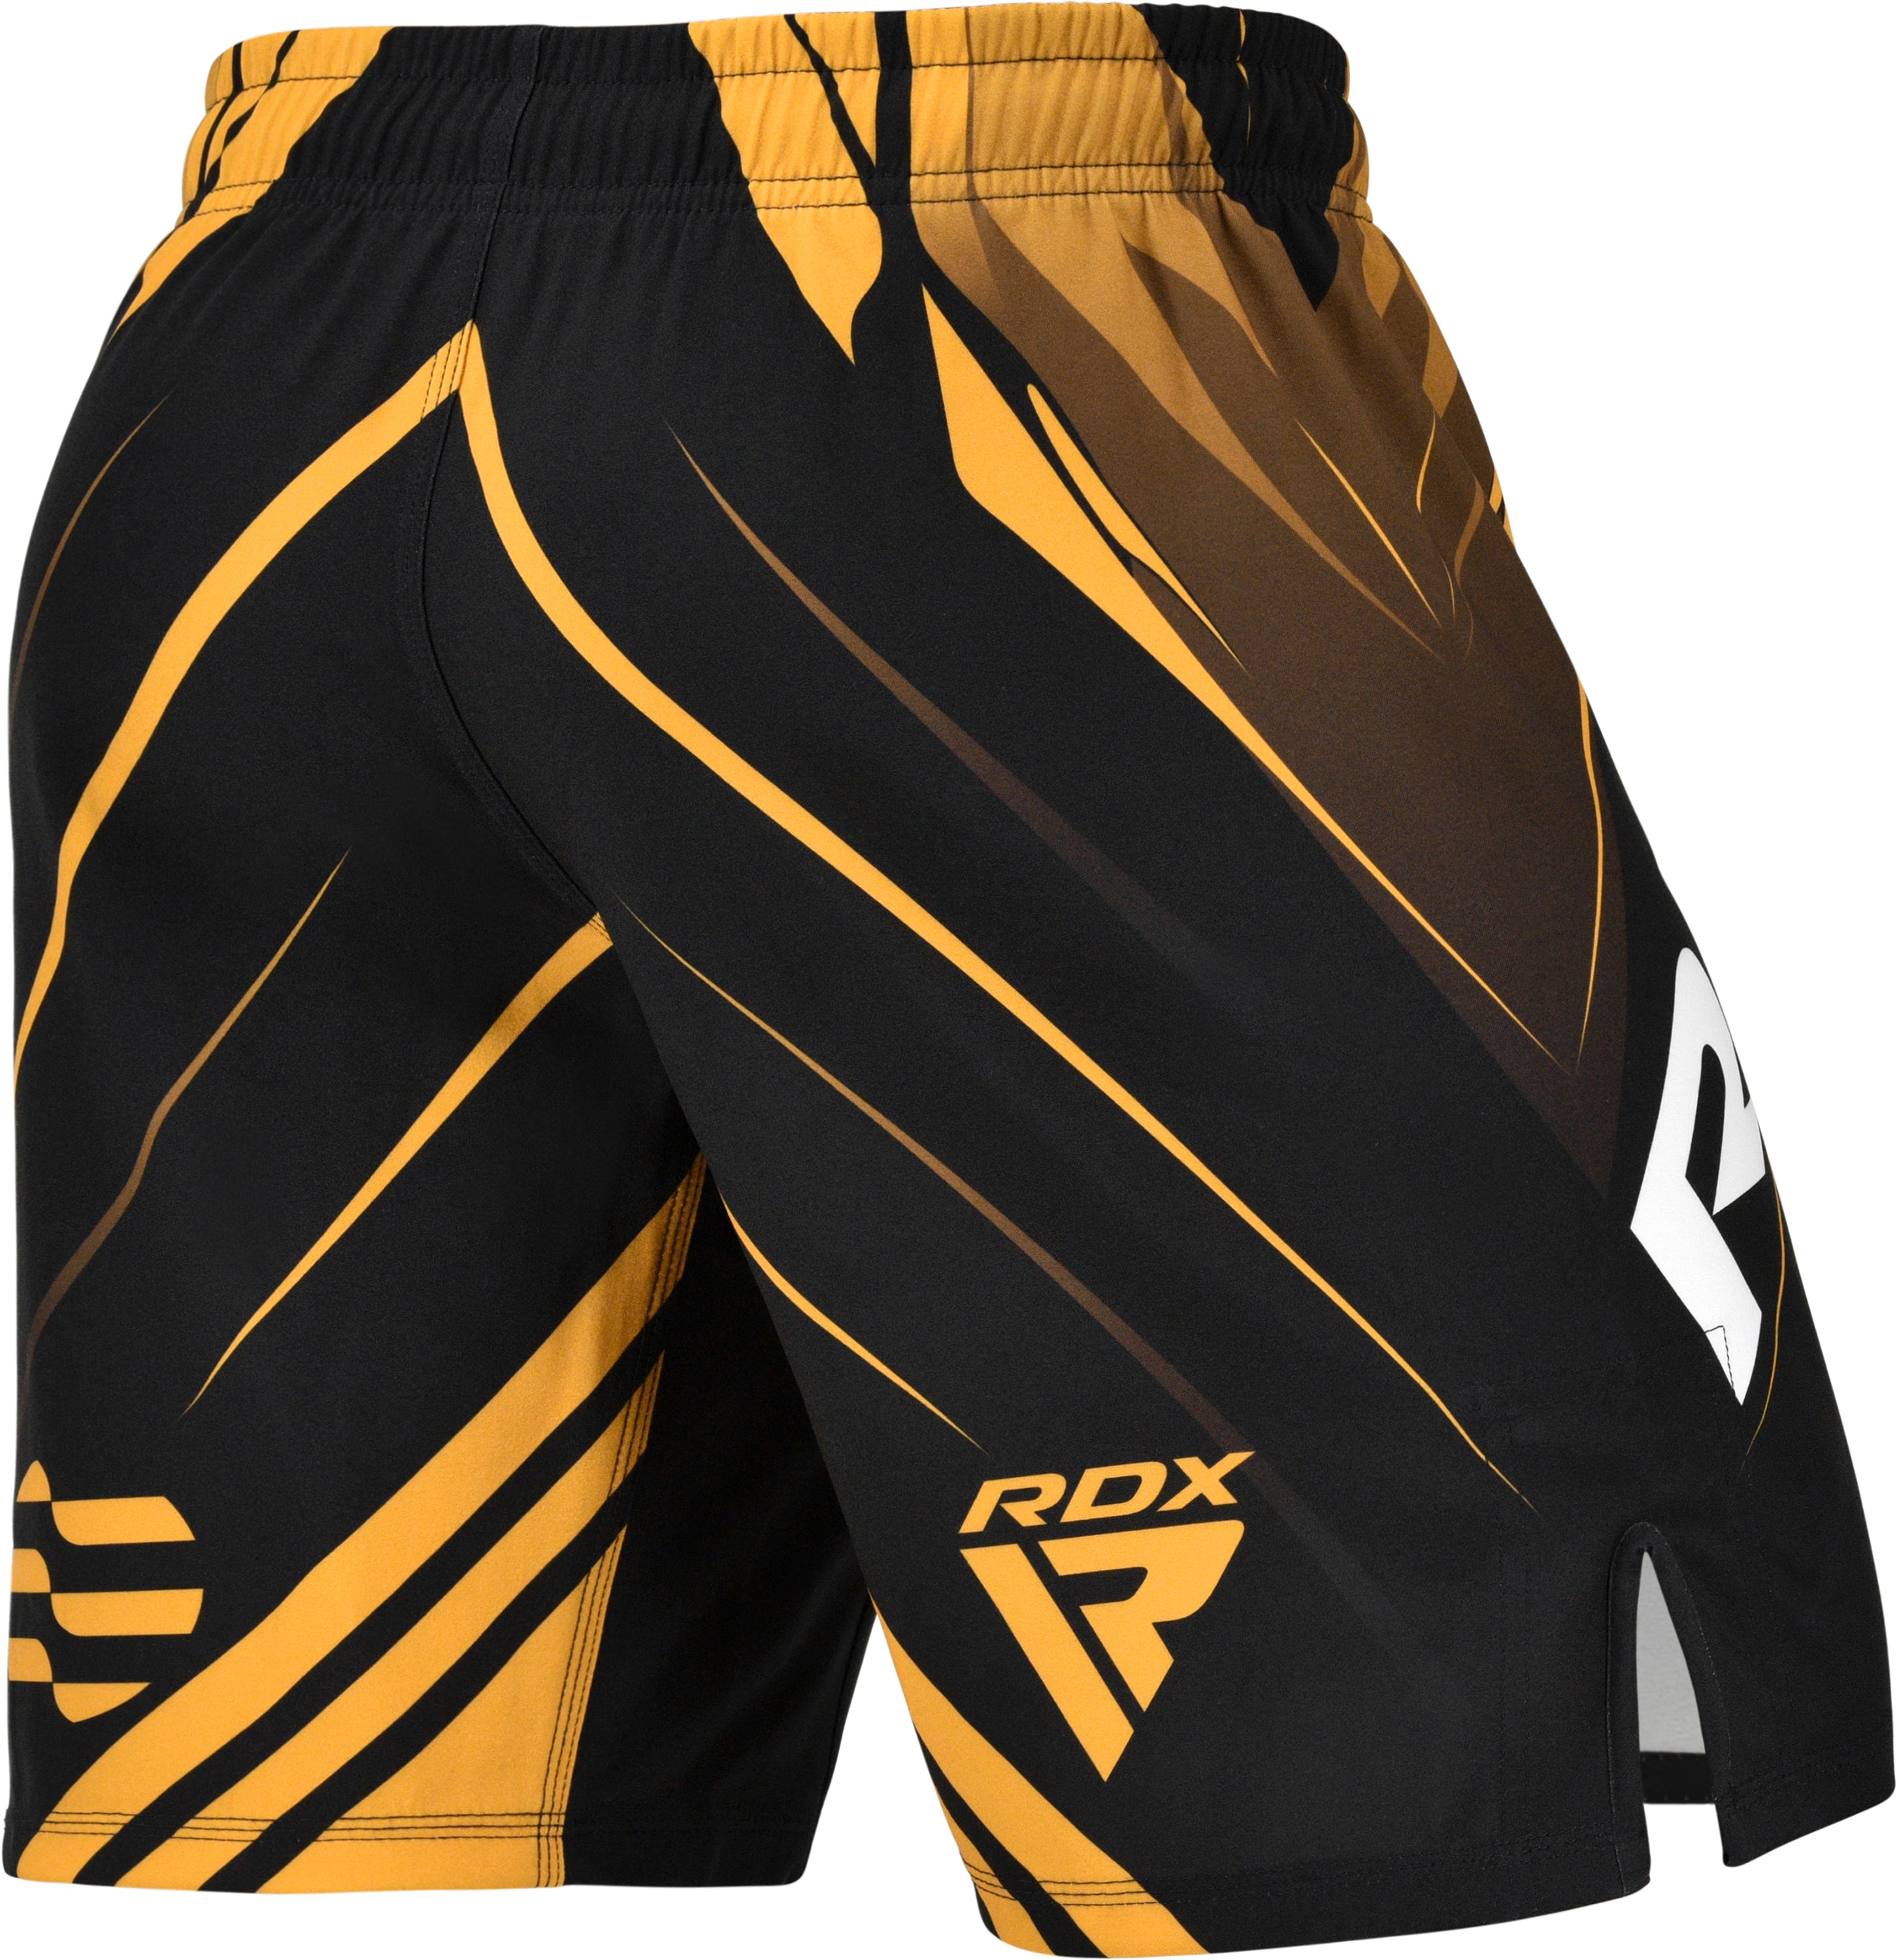 RDX IMMAF Approved MMA Fight & Training Shorts GOLDEN